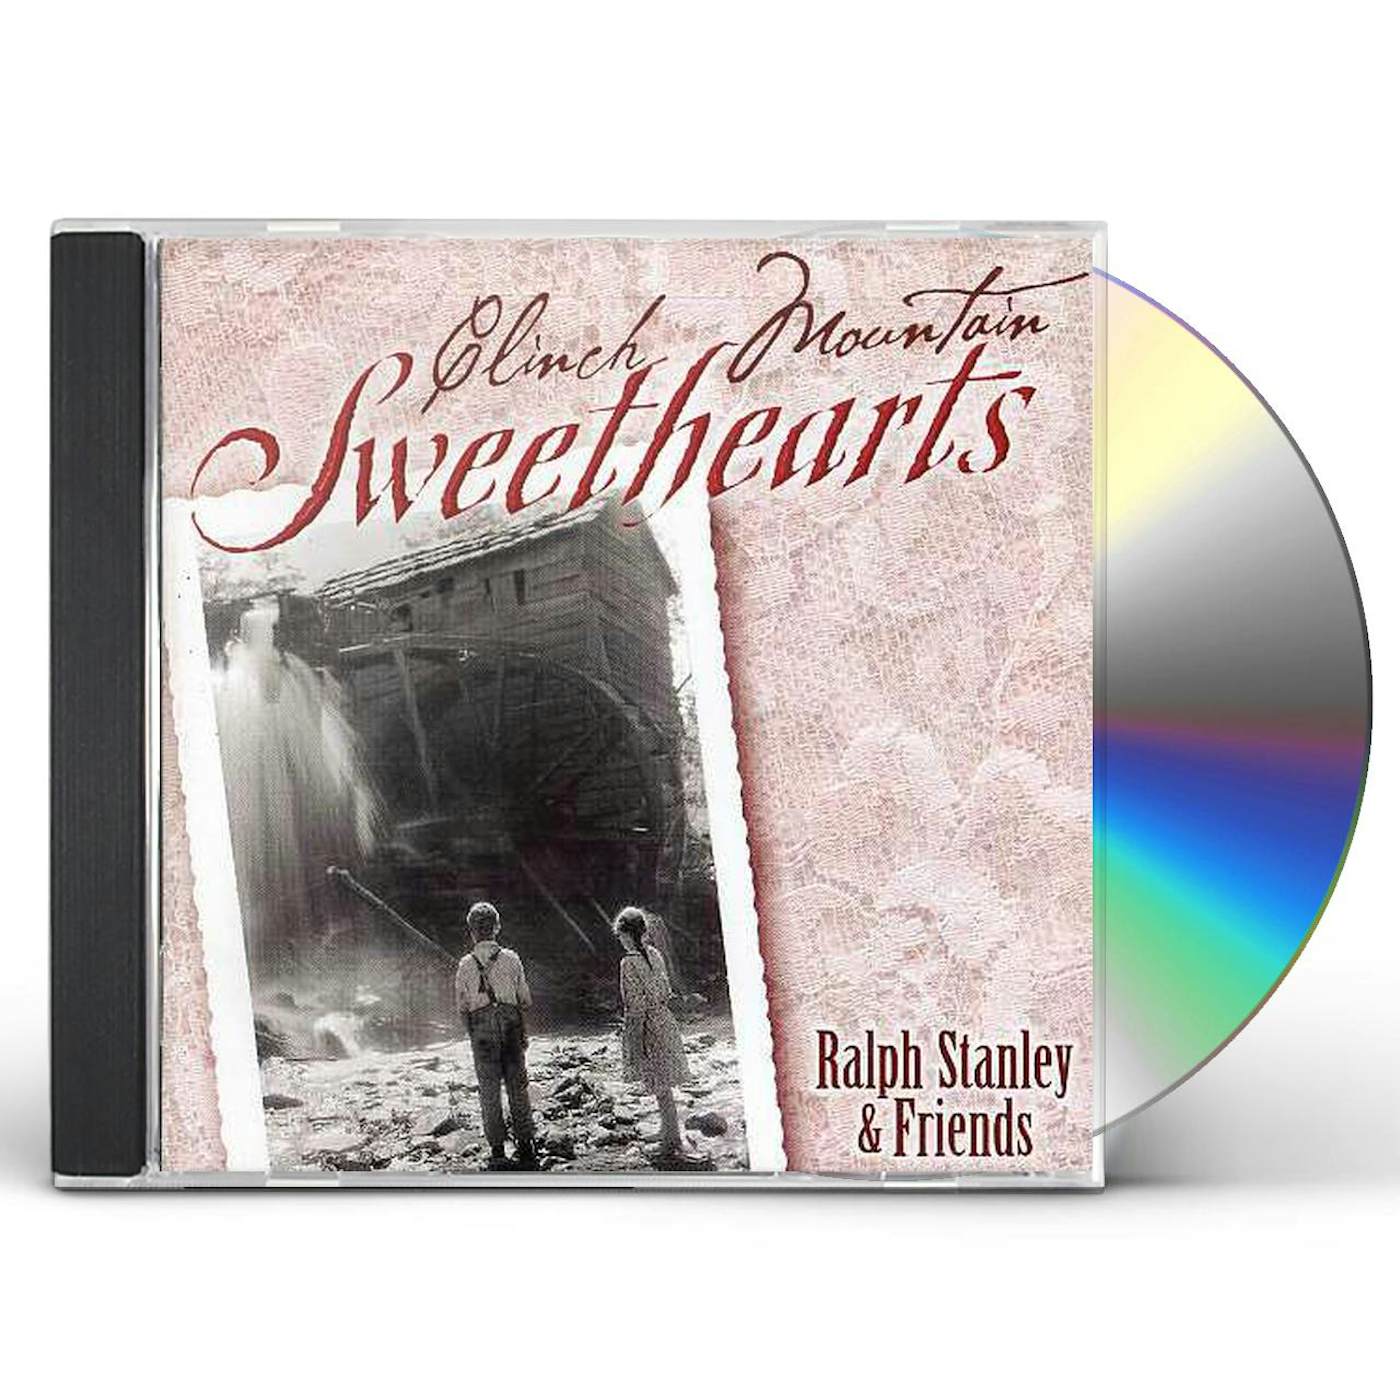 Ralph Stanley CLINCH MOUNTAIN SWEETHEARTS CD